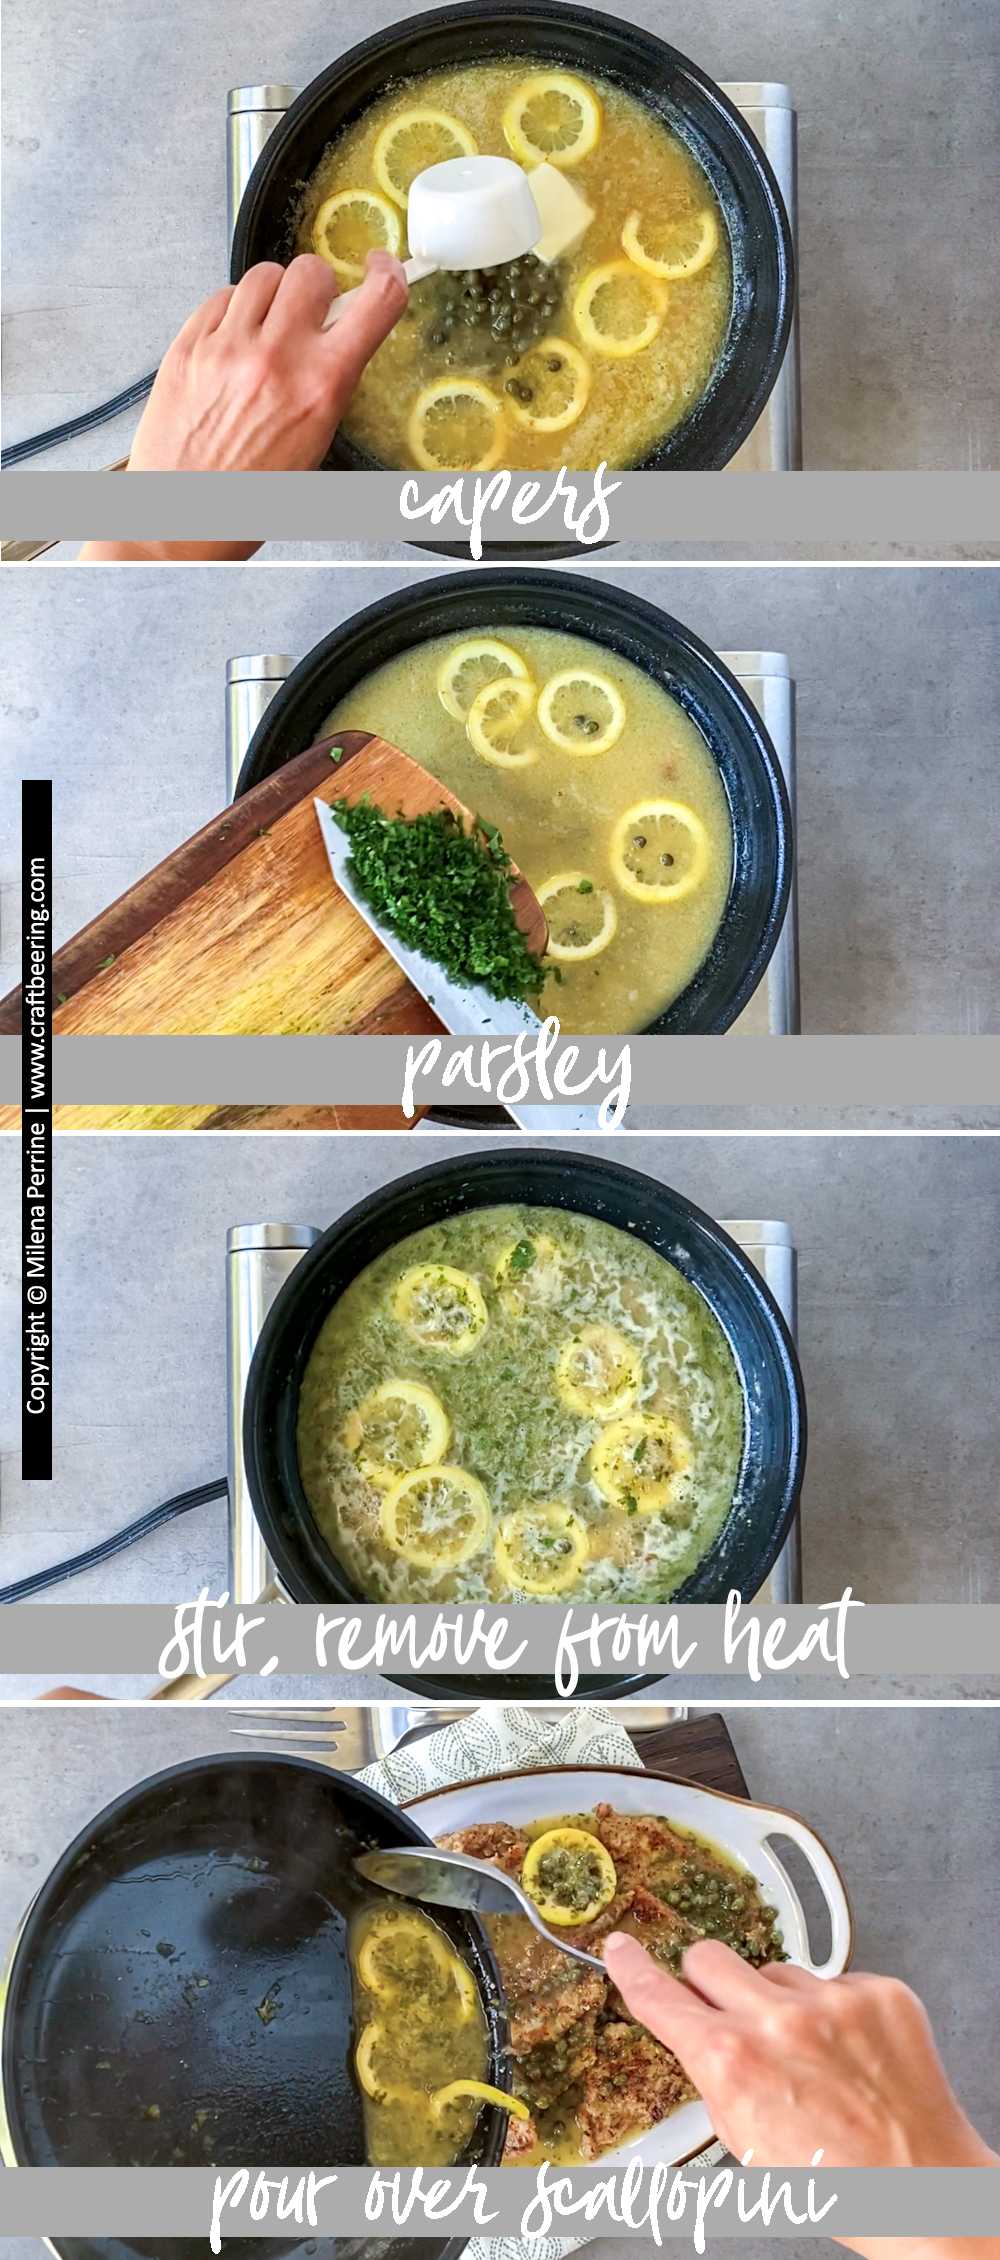 How to make piccata sauce for veal or chicken. Part 2, step-by-step.